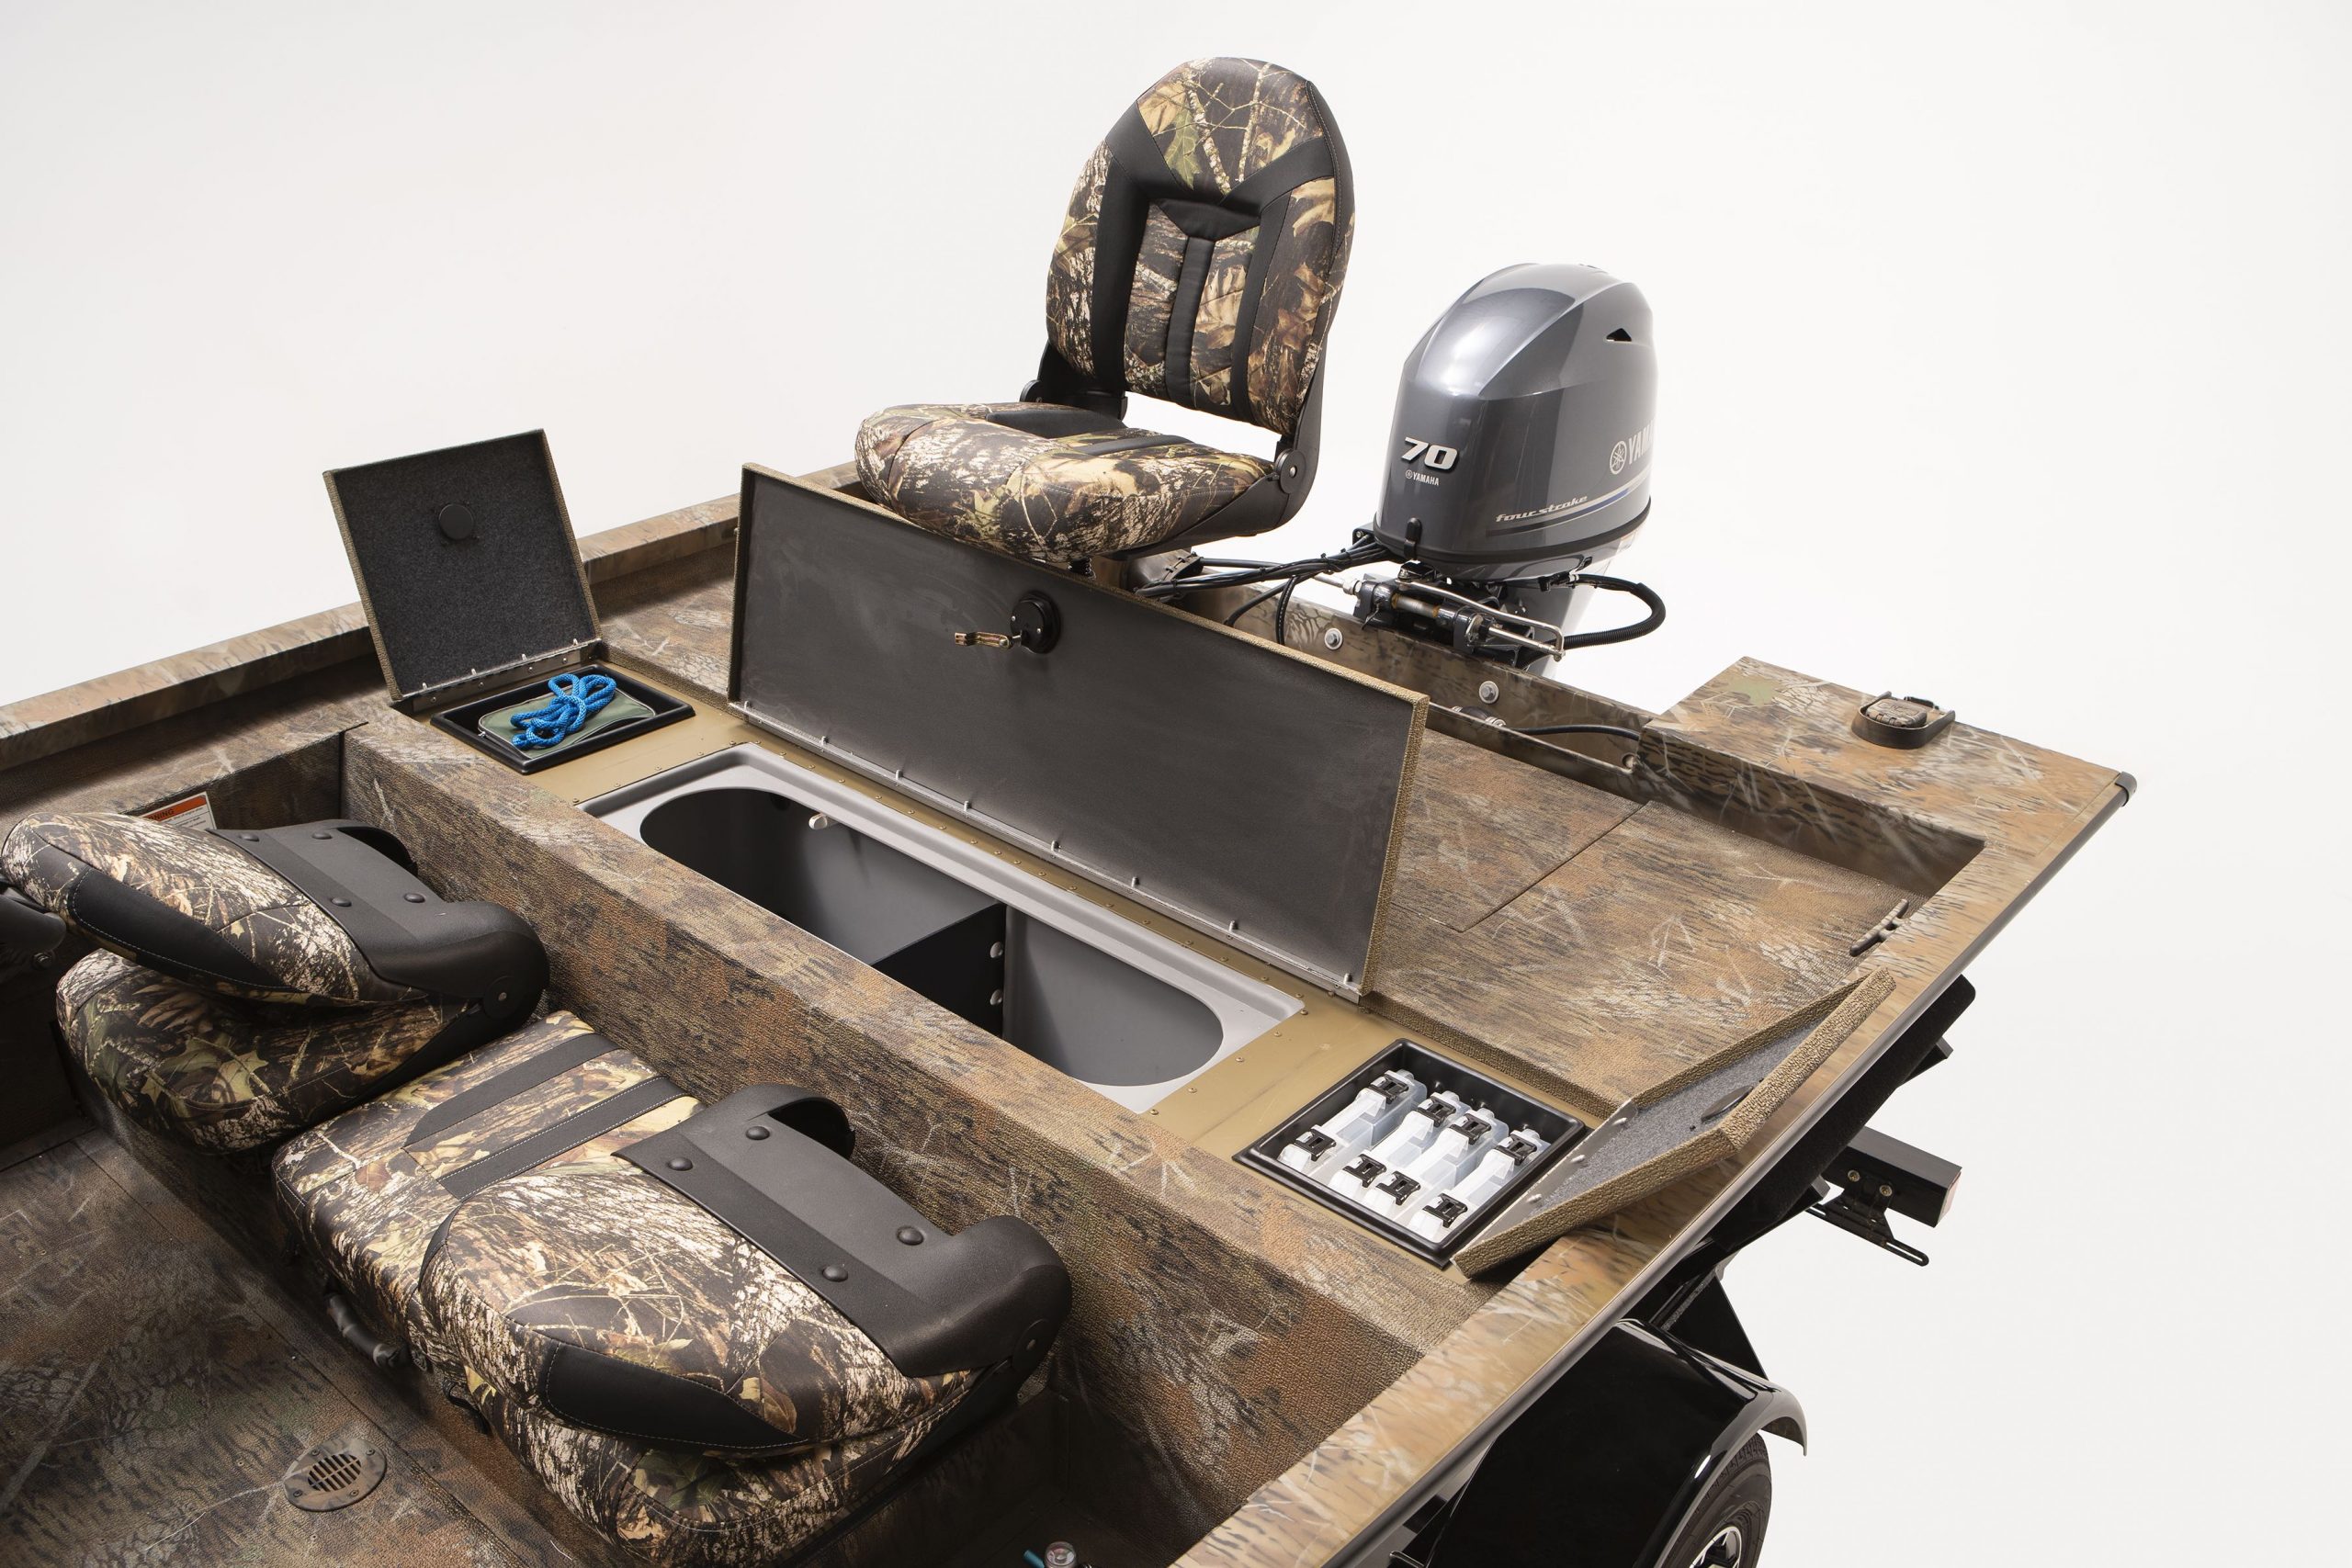 https://www.g3boats.com/wp/wp-content/uploads/2020/08/Sportsman-1610-SS-Front-Storage-scaled.jpg